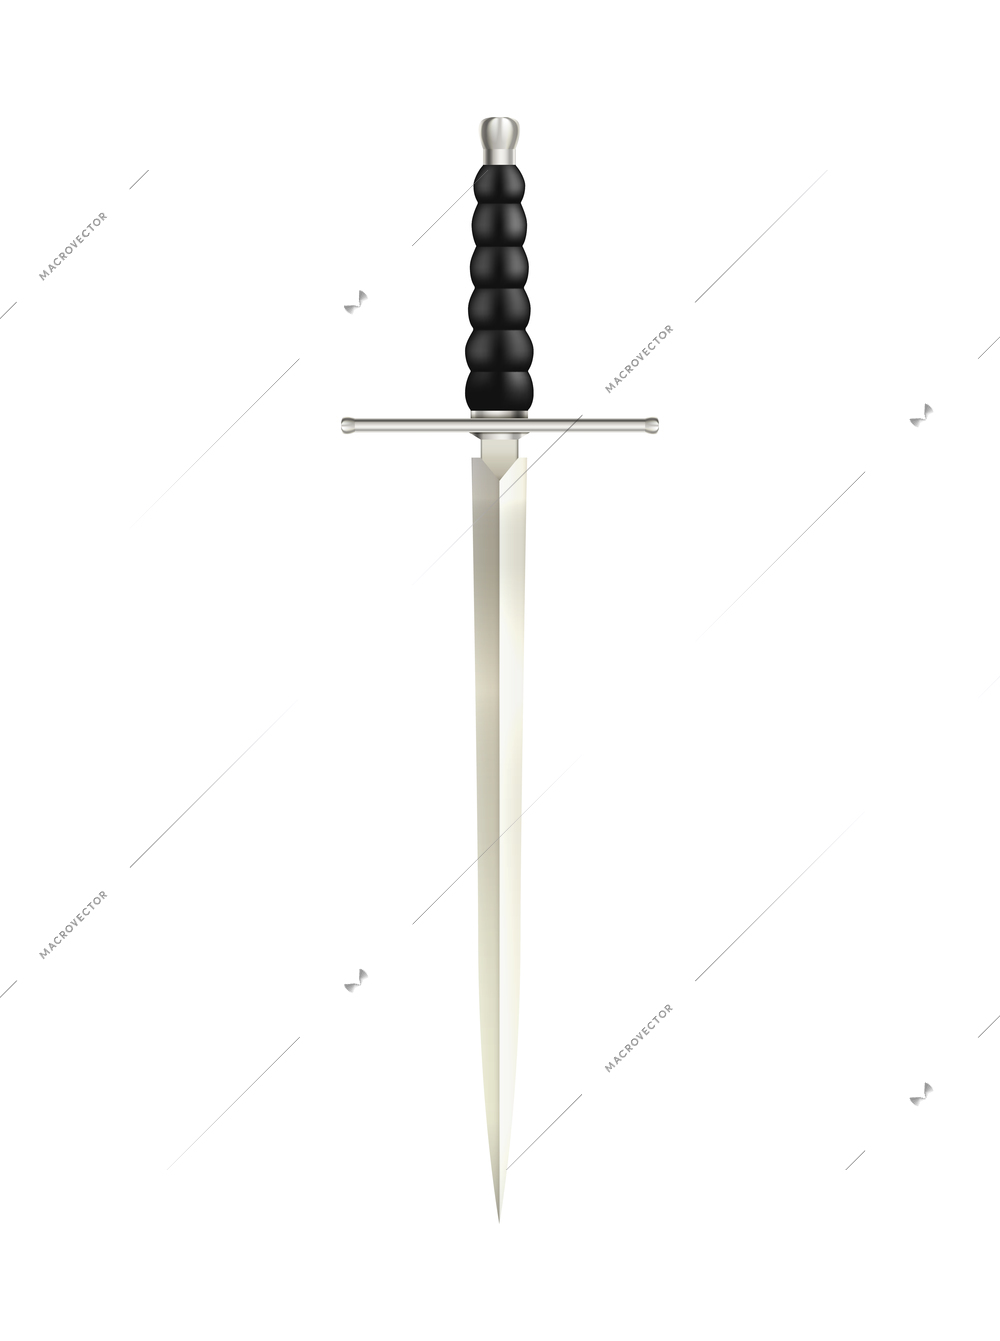 Swords composition with isolated image of medieval sword with straight blade and thin end vector illustration